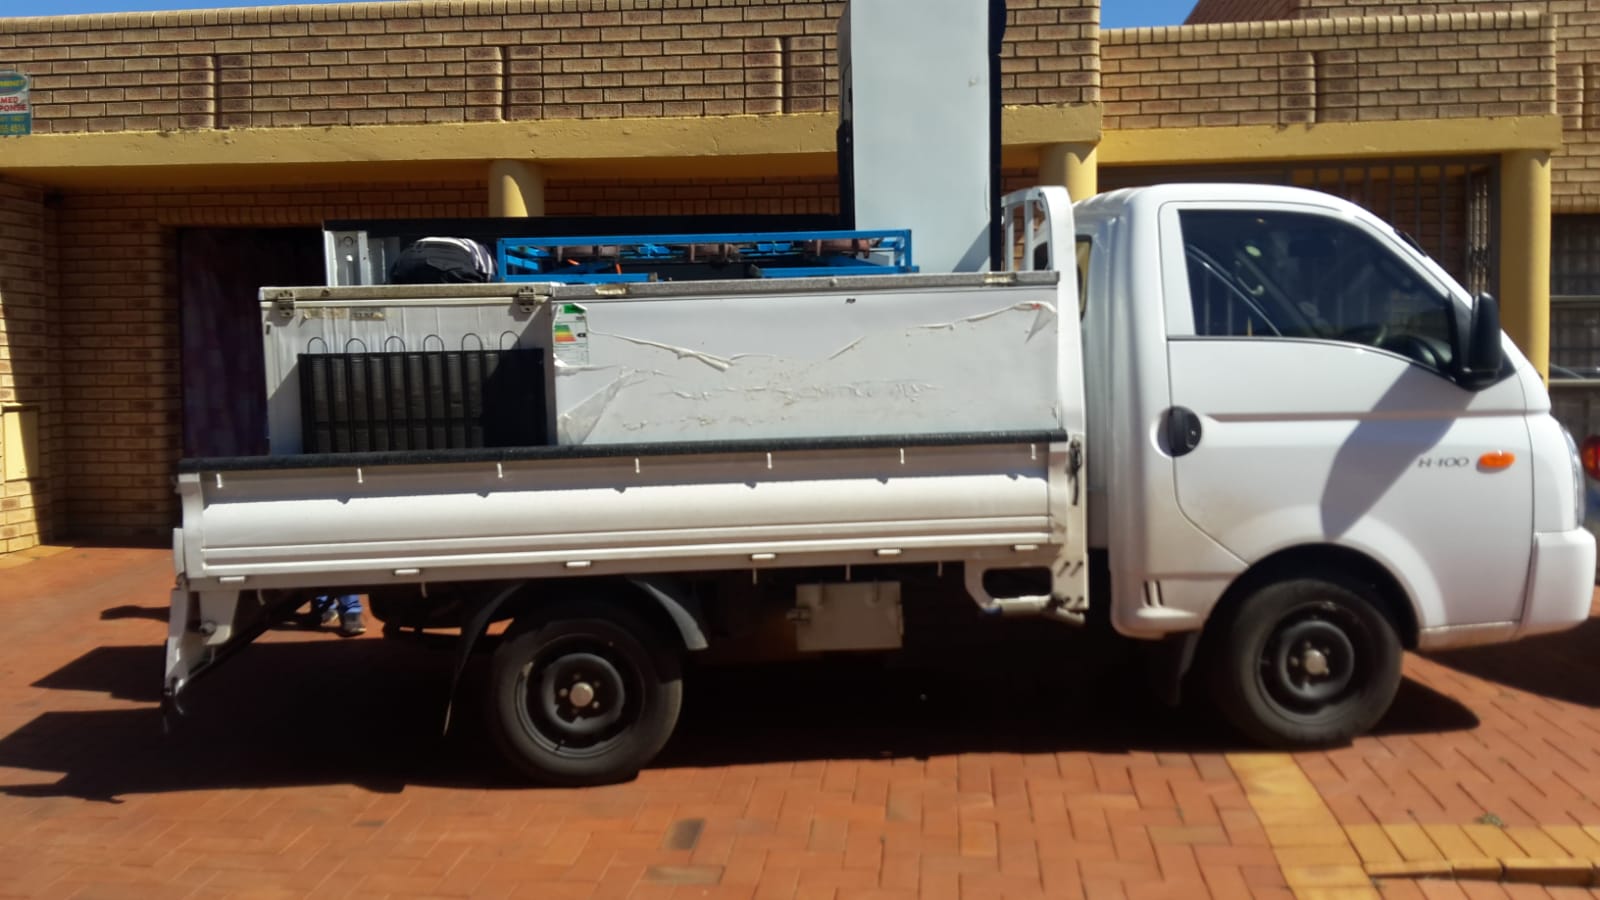 Bakkie for Hire. Reliable and Affordable services. 